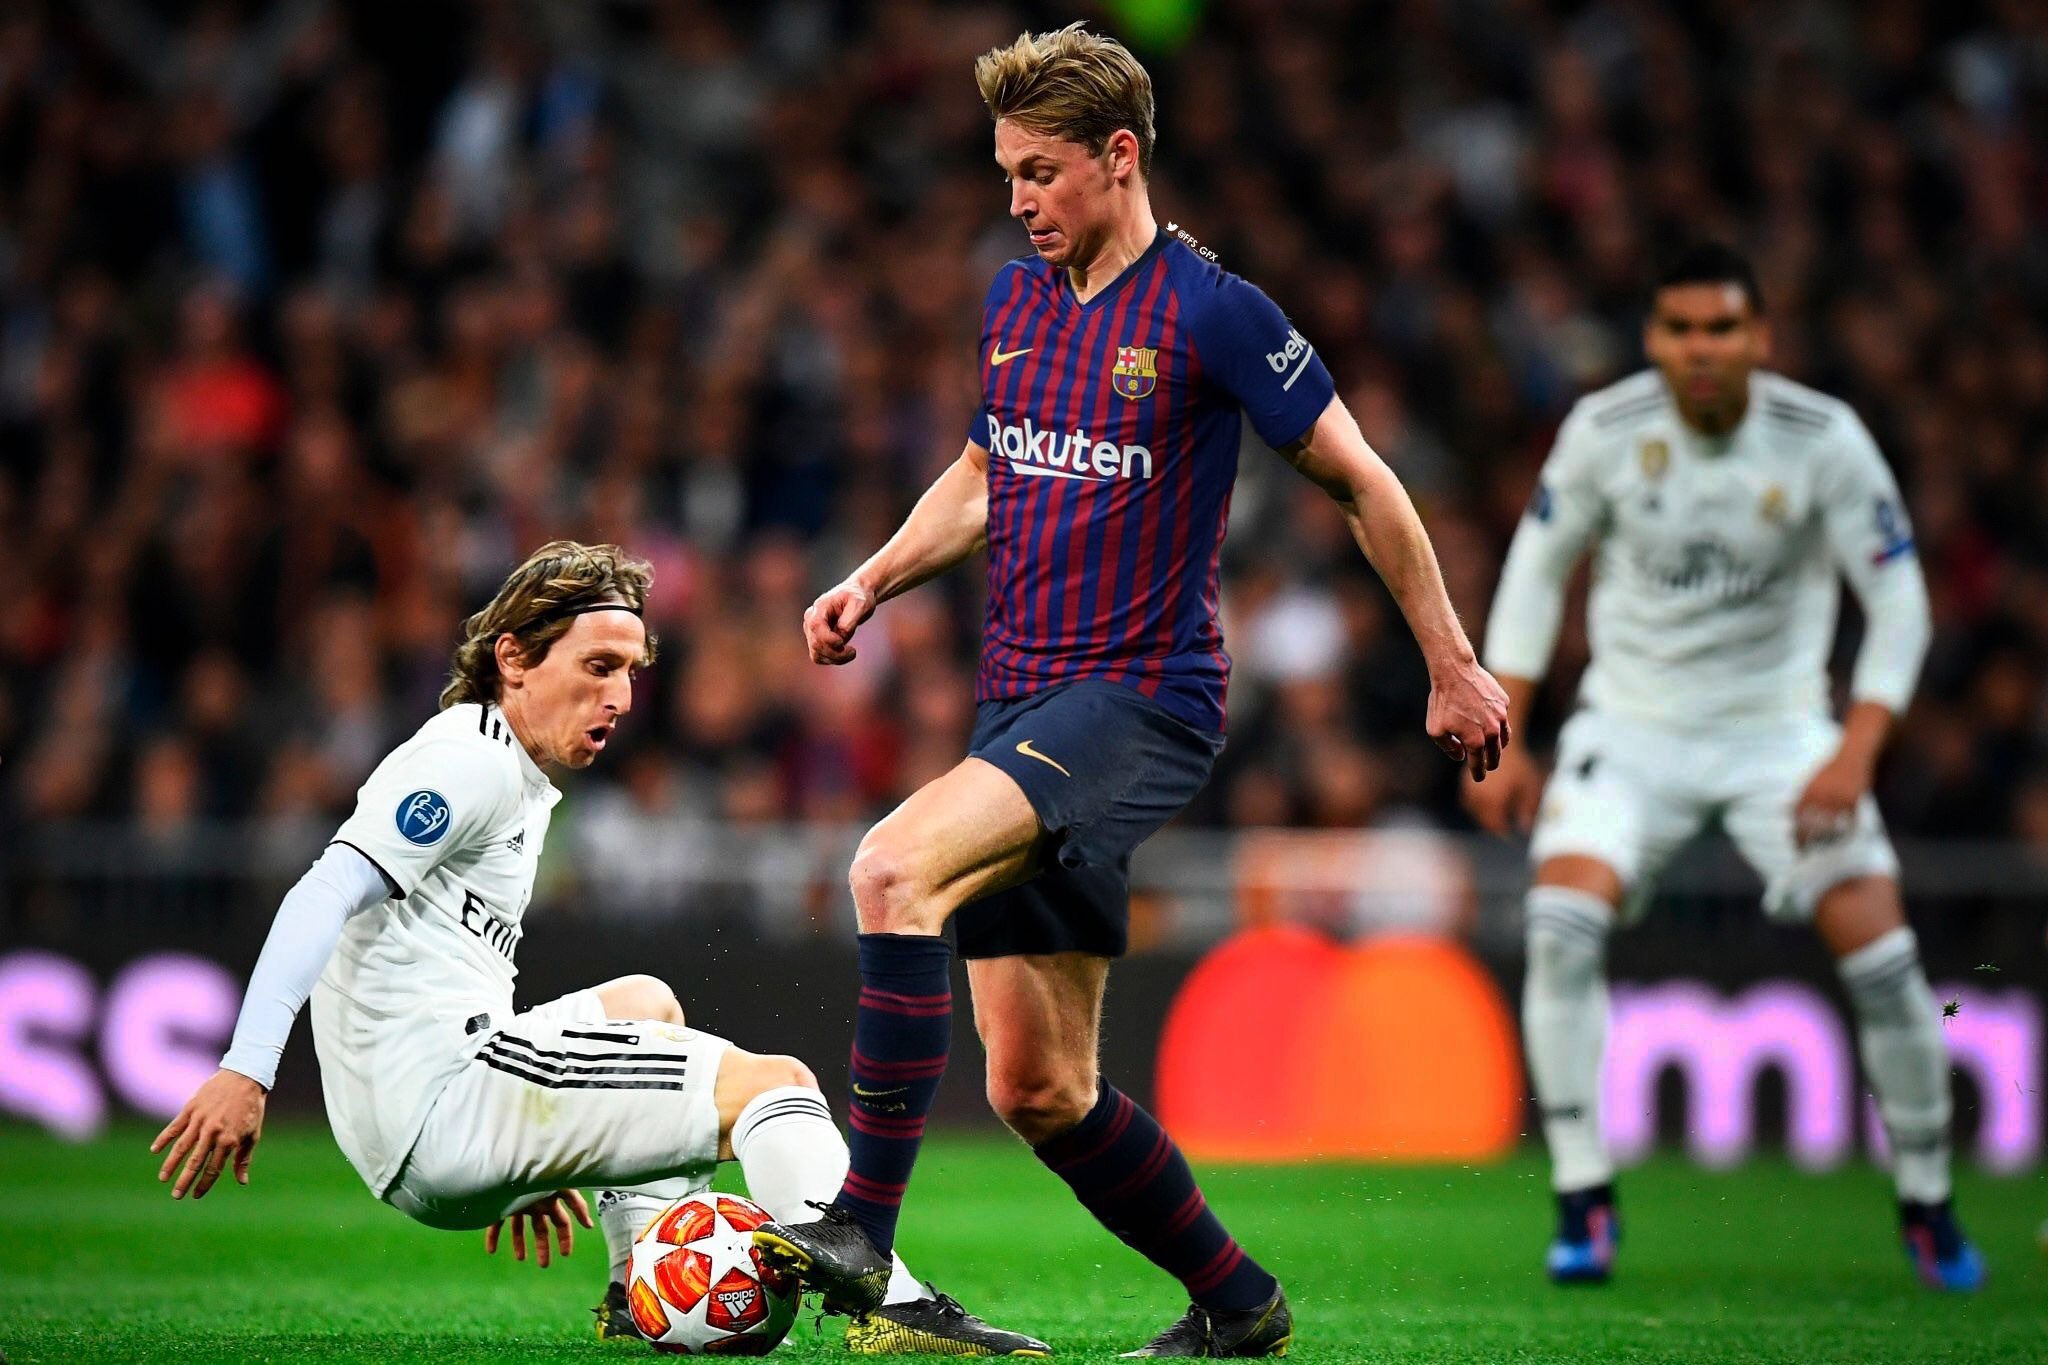 People 2048x1365 FC Barcelona Real Madrid Champions League Luka Modric soccer clubs soccer player men